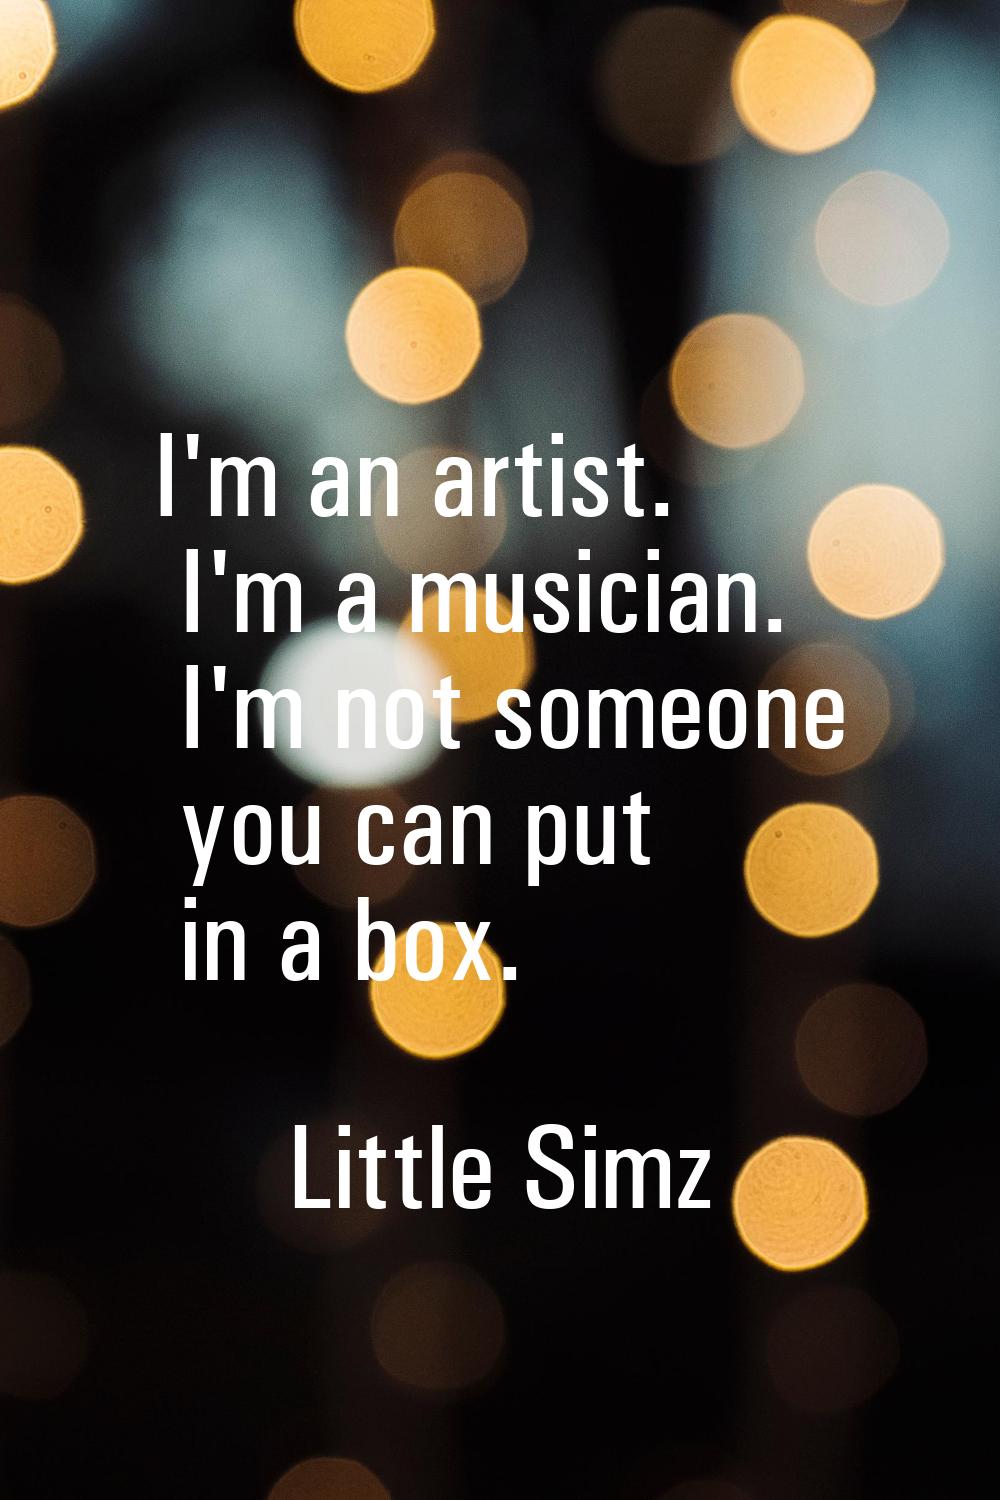 I'm an artist. I'm a musician. I'm not someone you can put in a box.